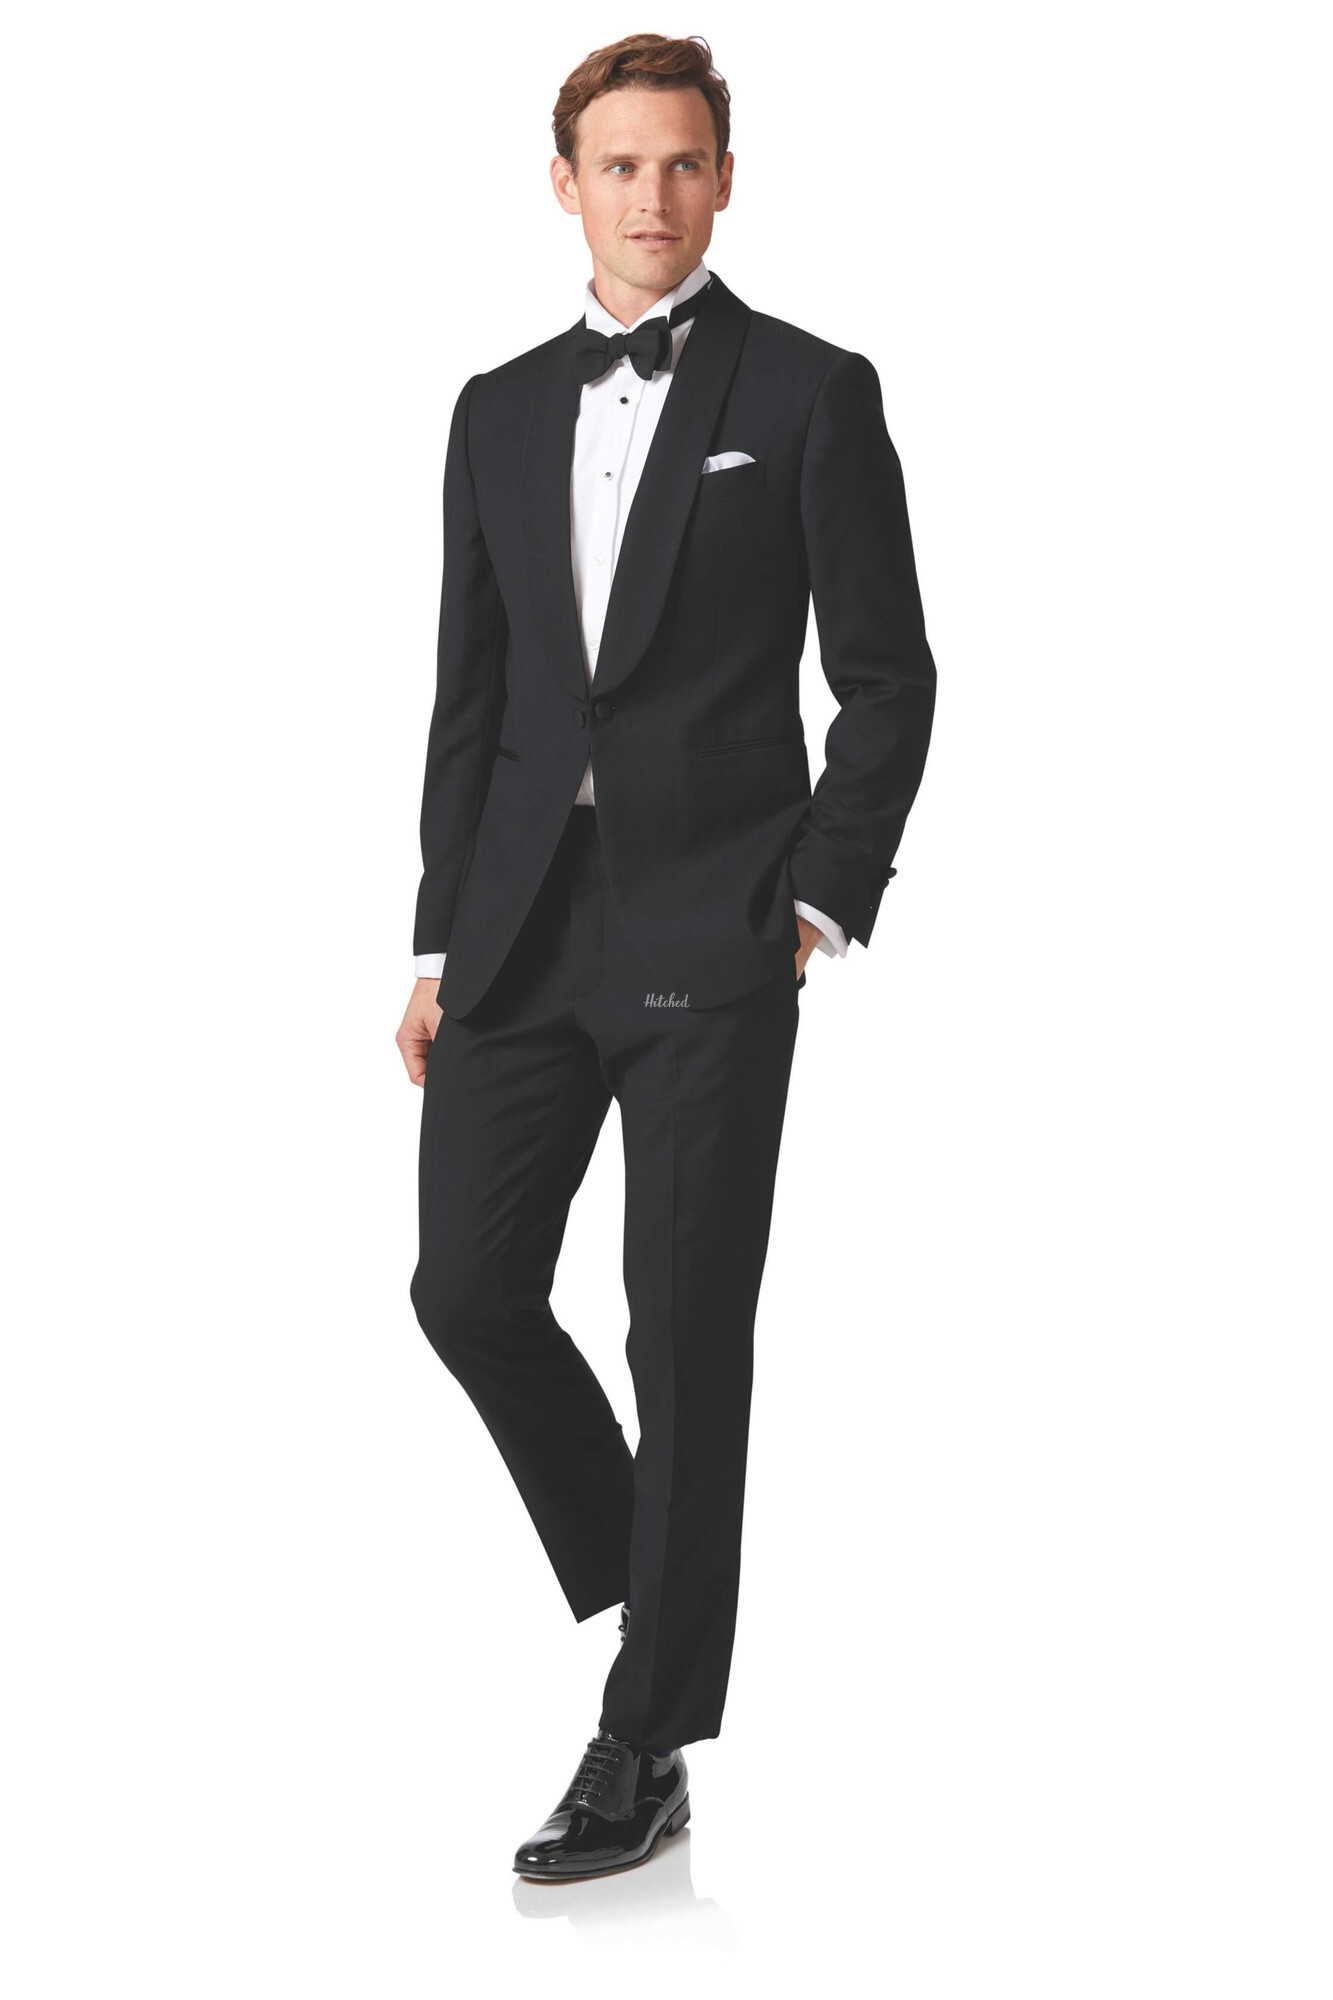 Black extra slim fit dinner suit Mens Wedding Suit from Charles ...